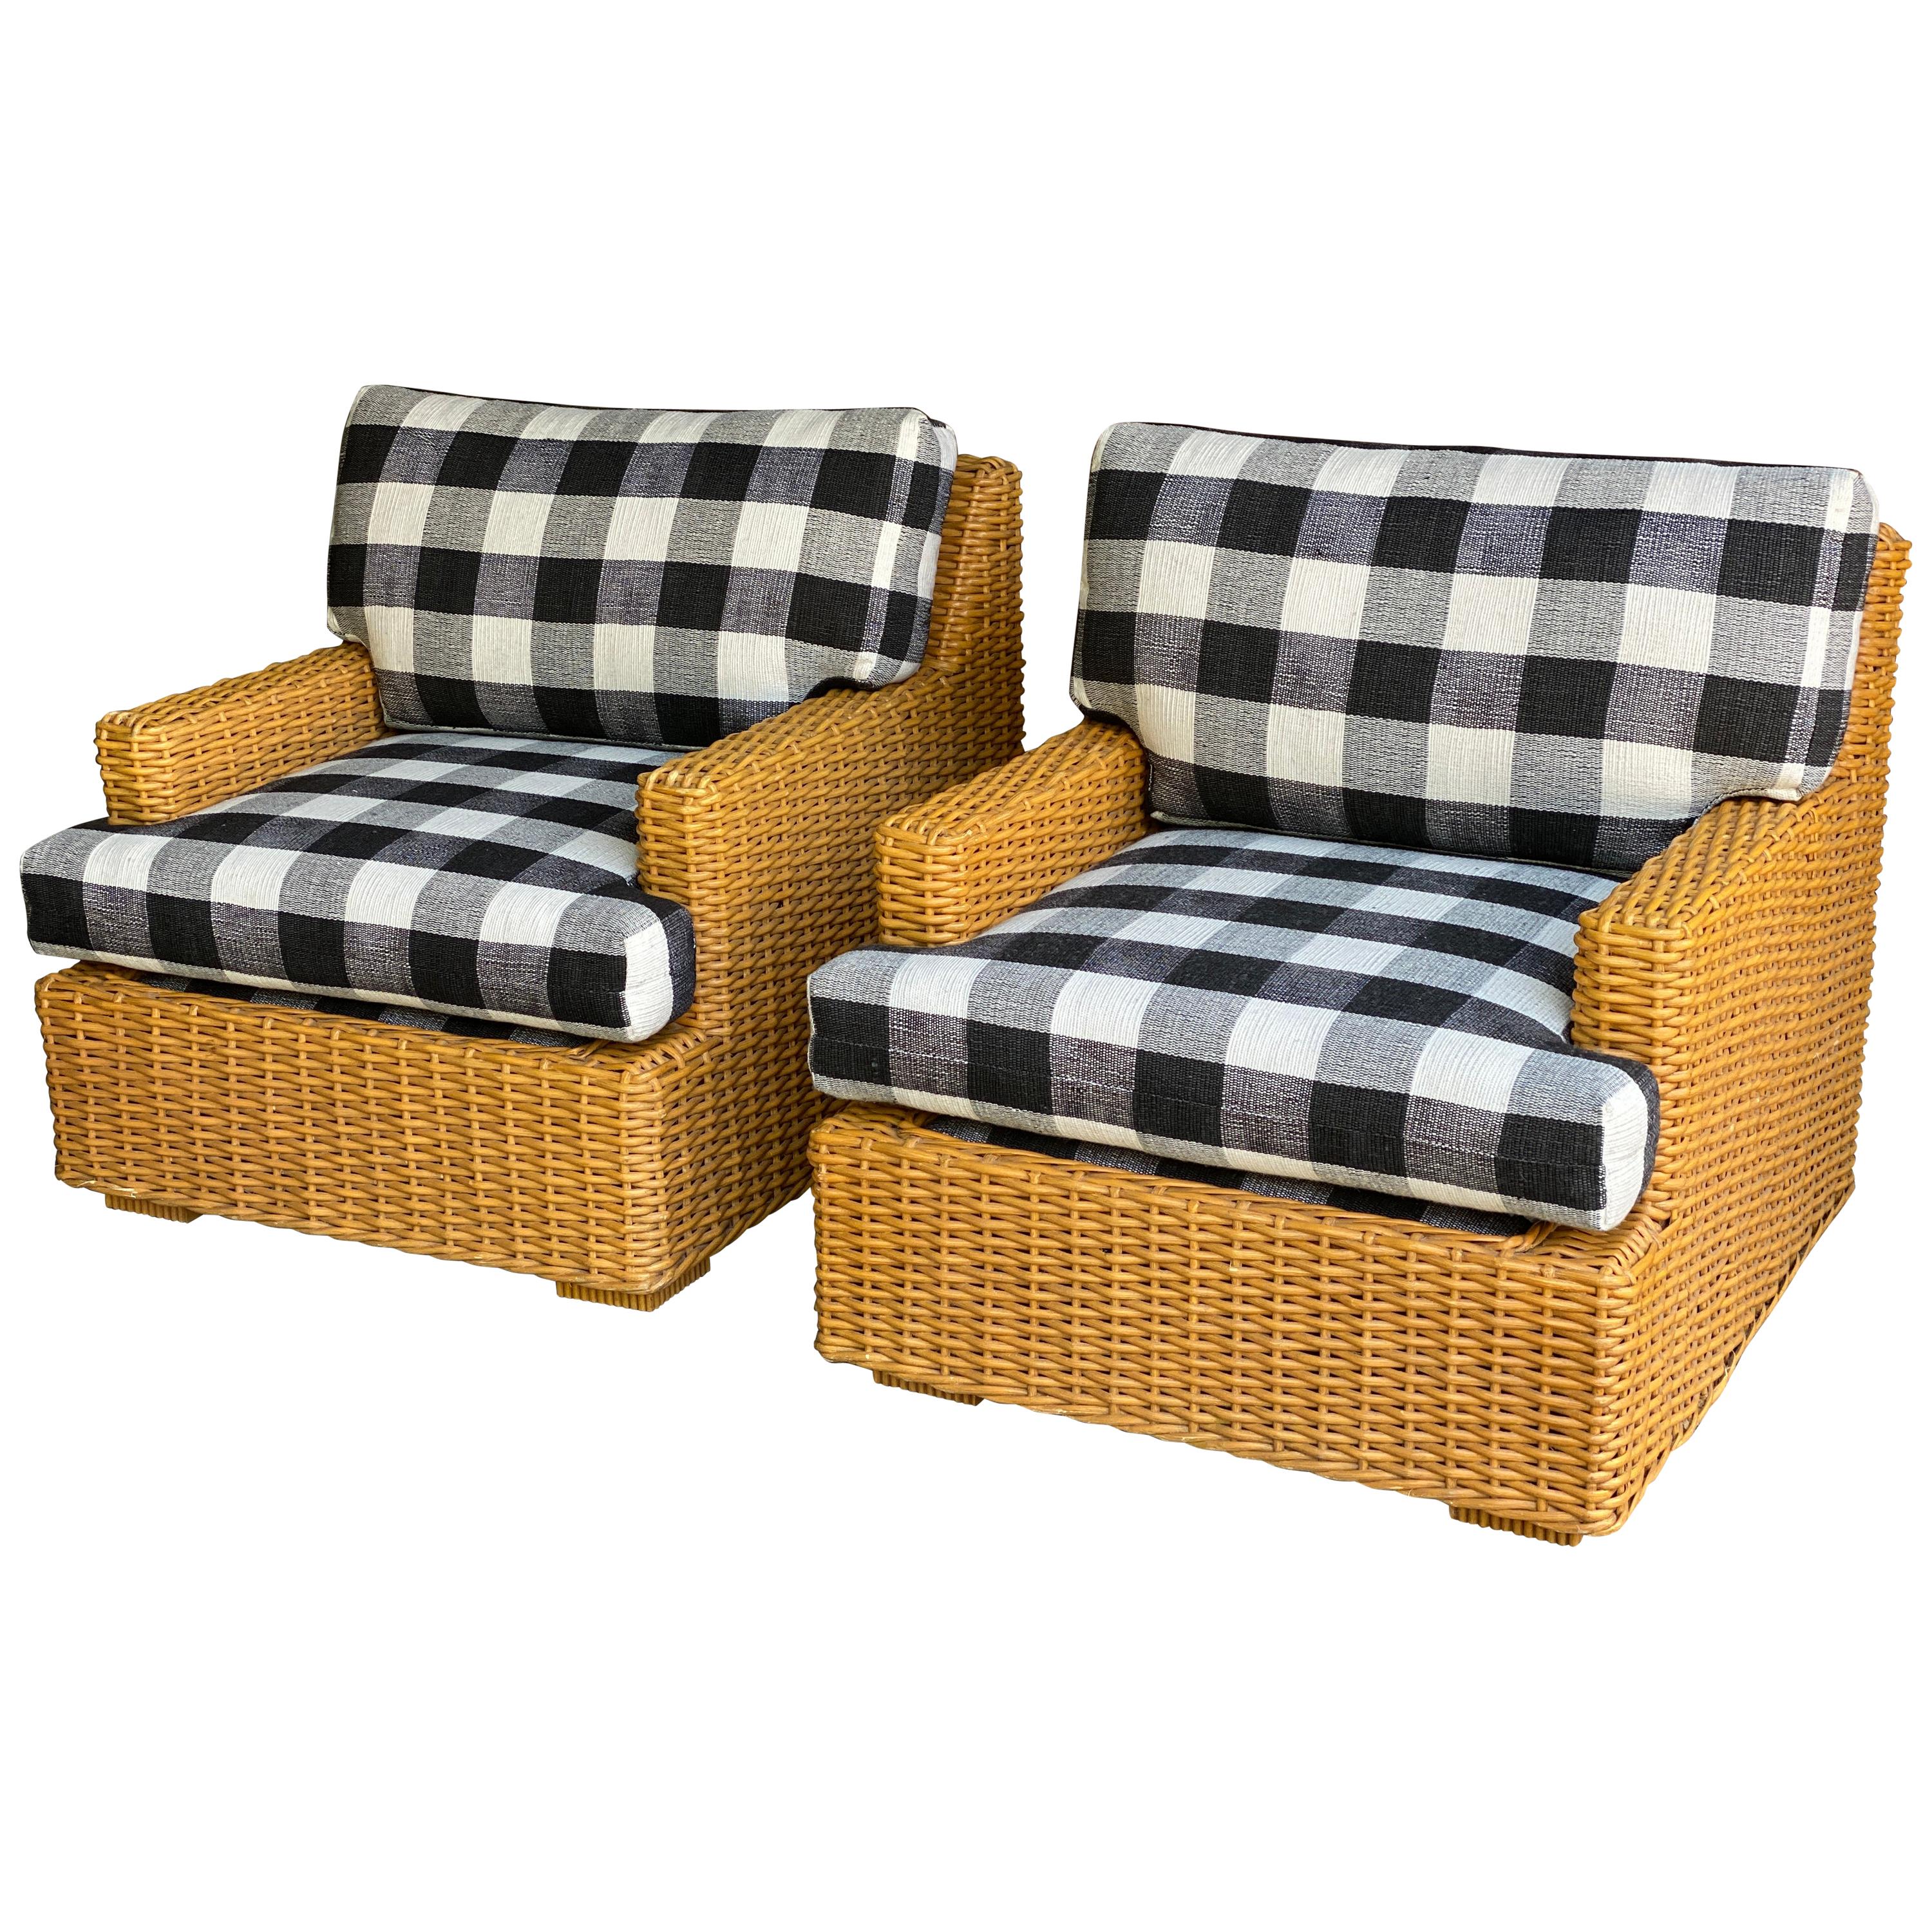 Pair of Vintage Wicker Lounge Chairs, Newly Upholstered